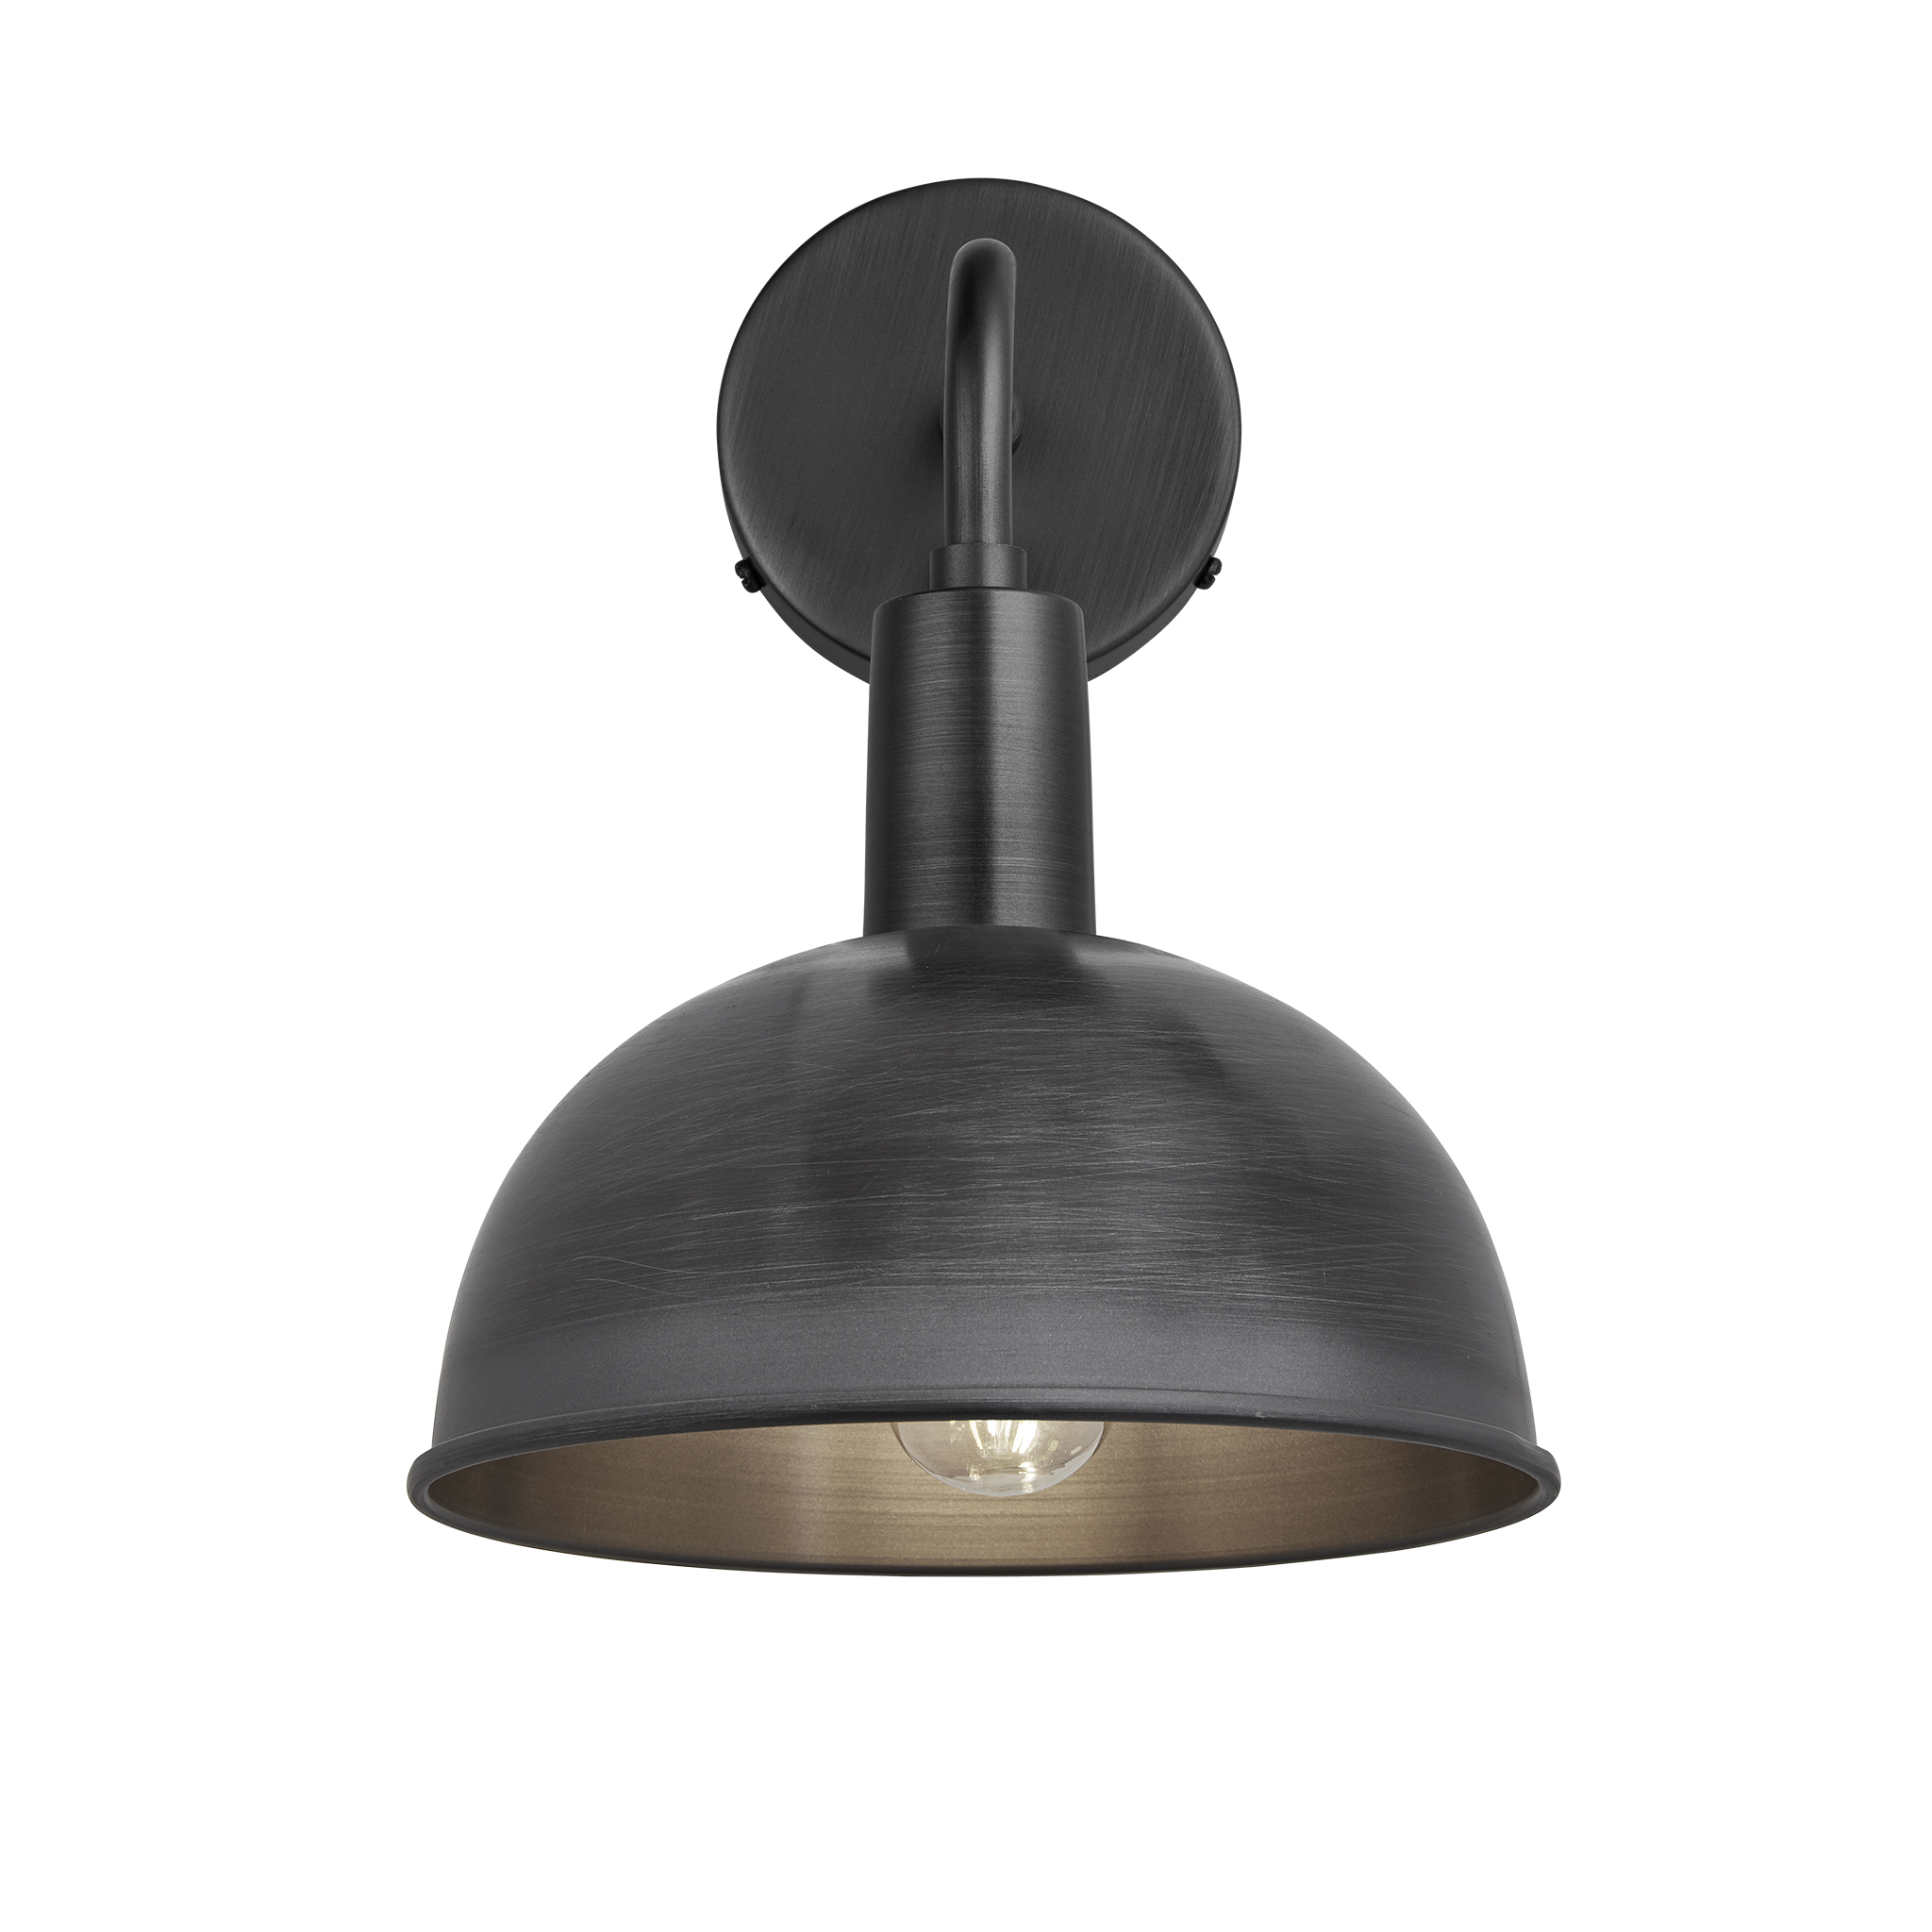  Sleek Dome Wall Light - 8 Inch - Pewter - Pewter Holder